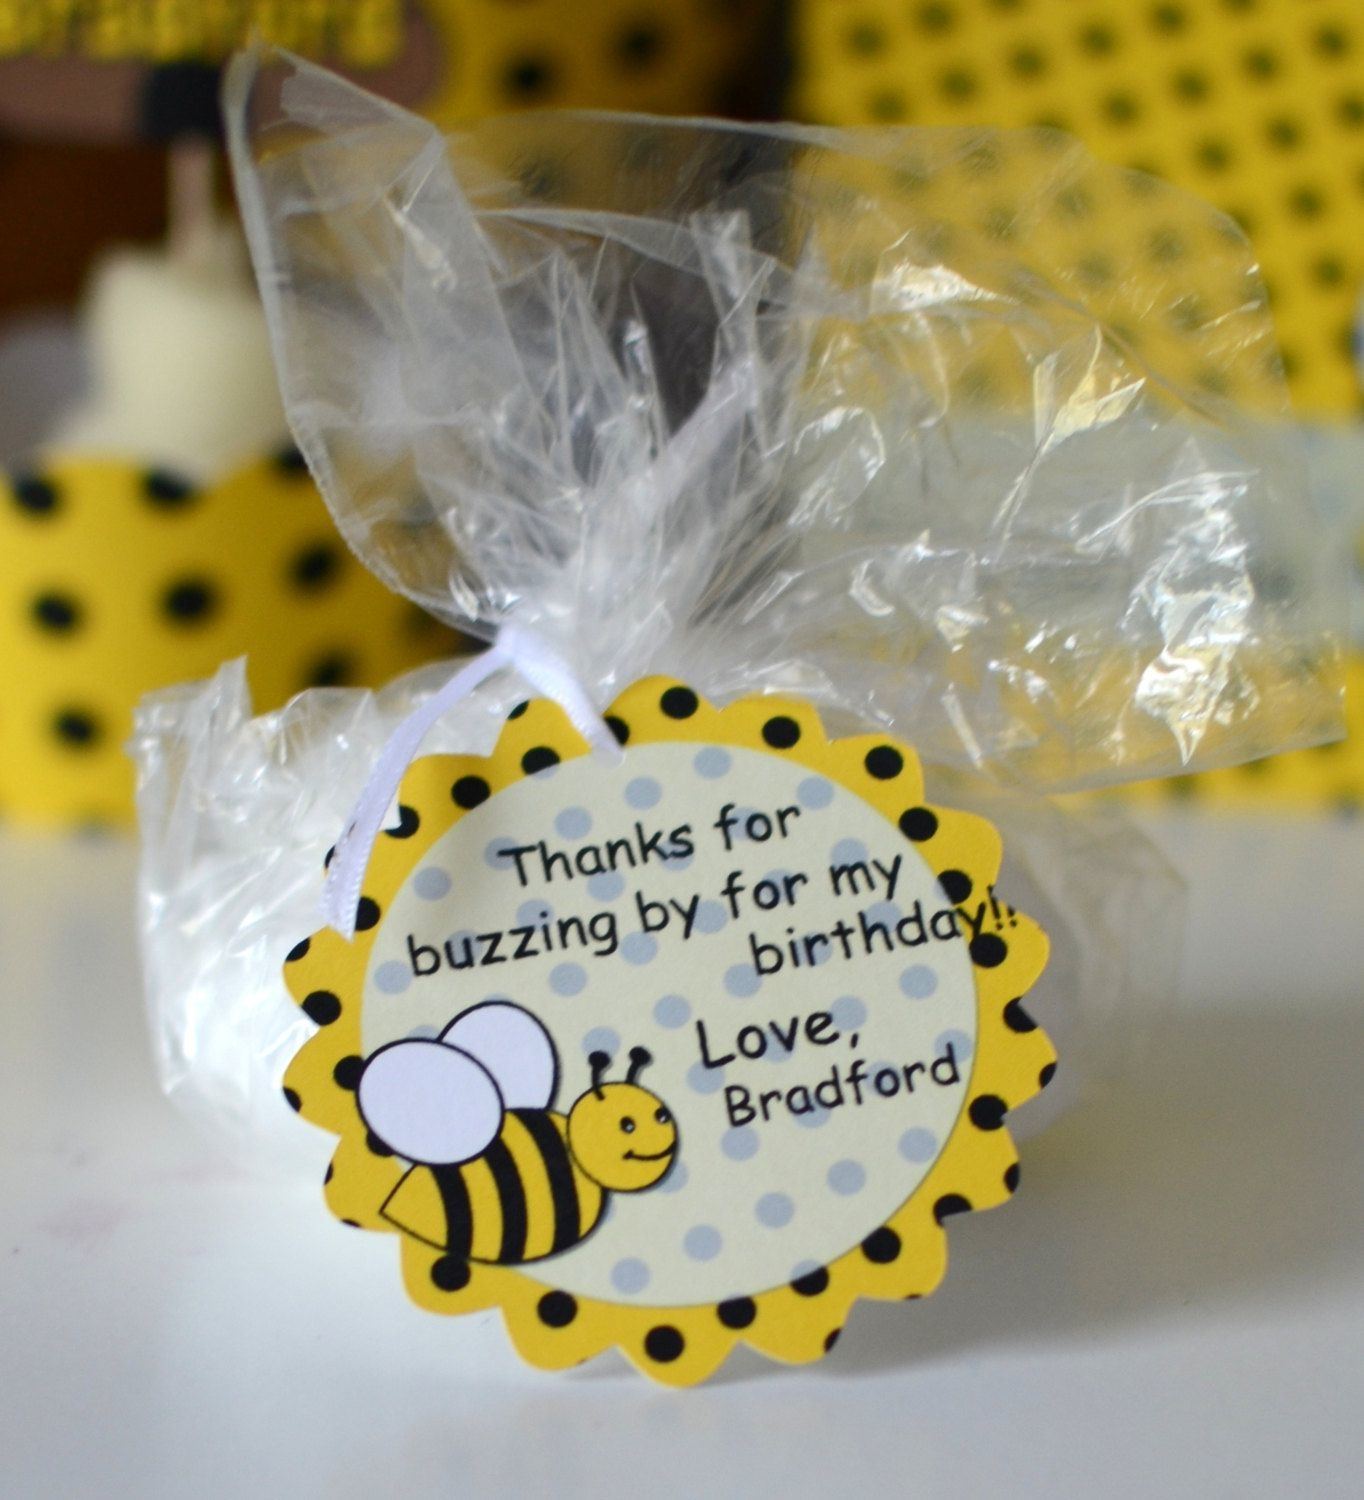 Bumble+BEE+Birthday+Party+Favors+Bumble+Bee+Baby+by+bcpaperdesigns,+$9